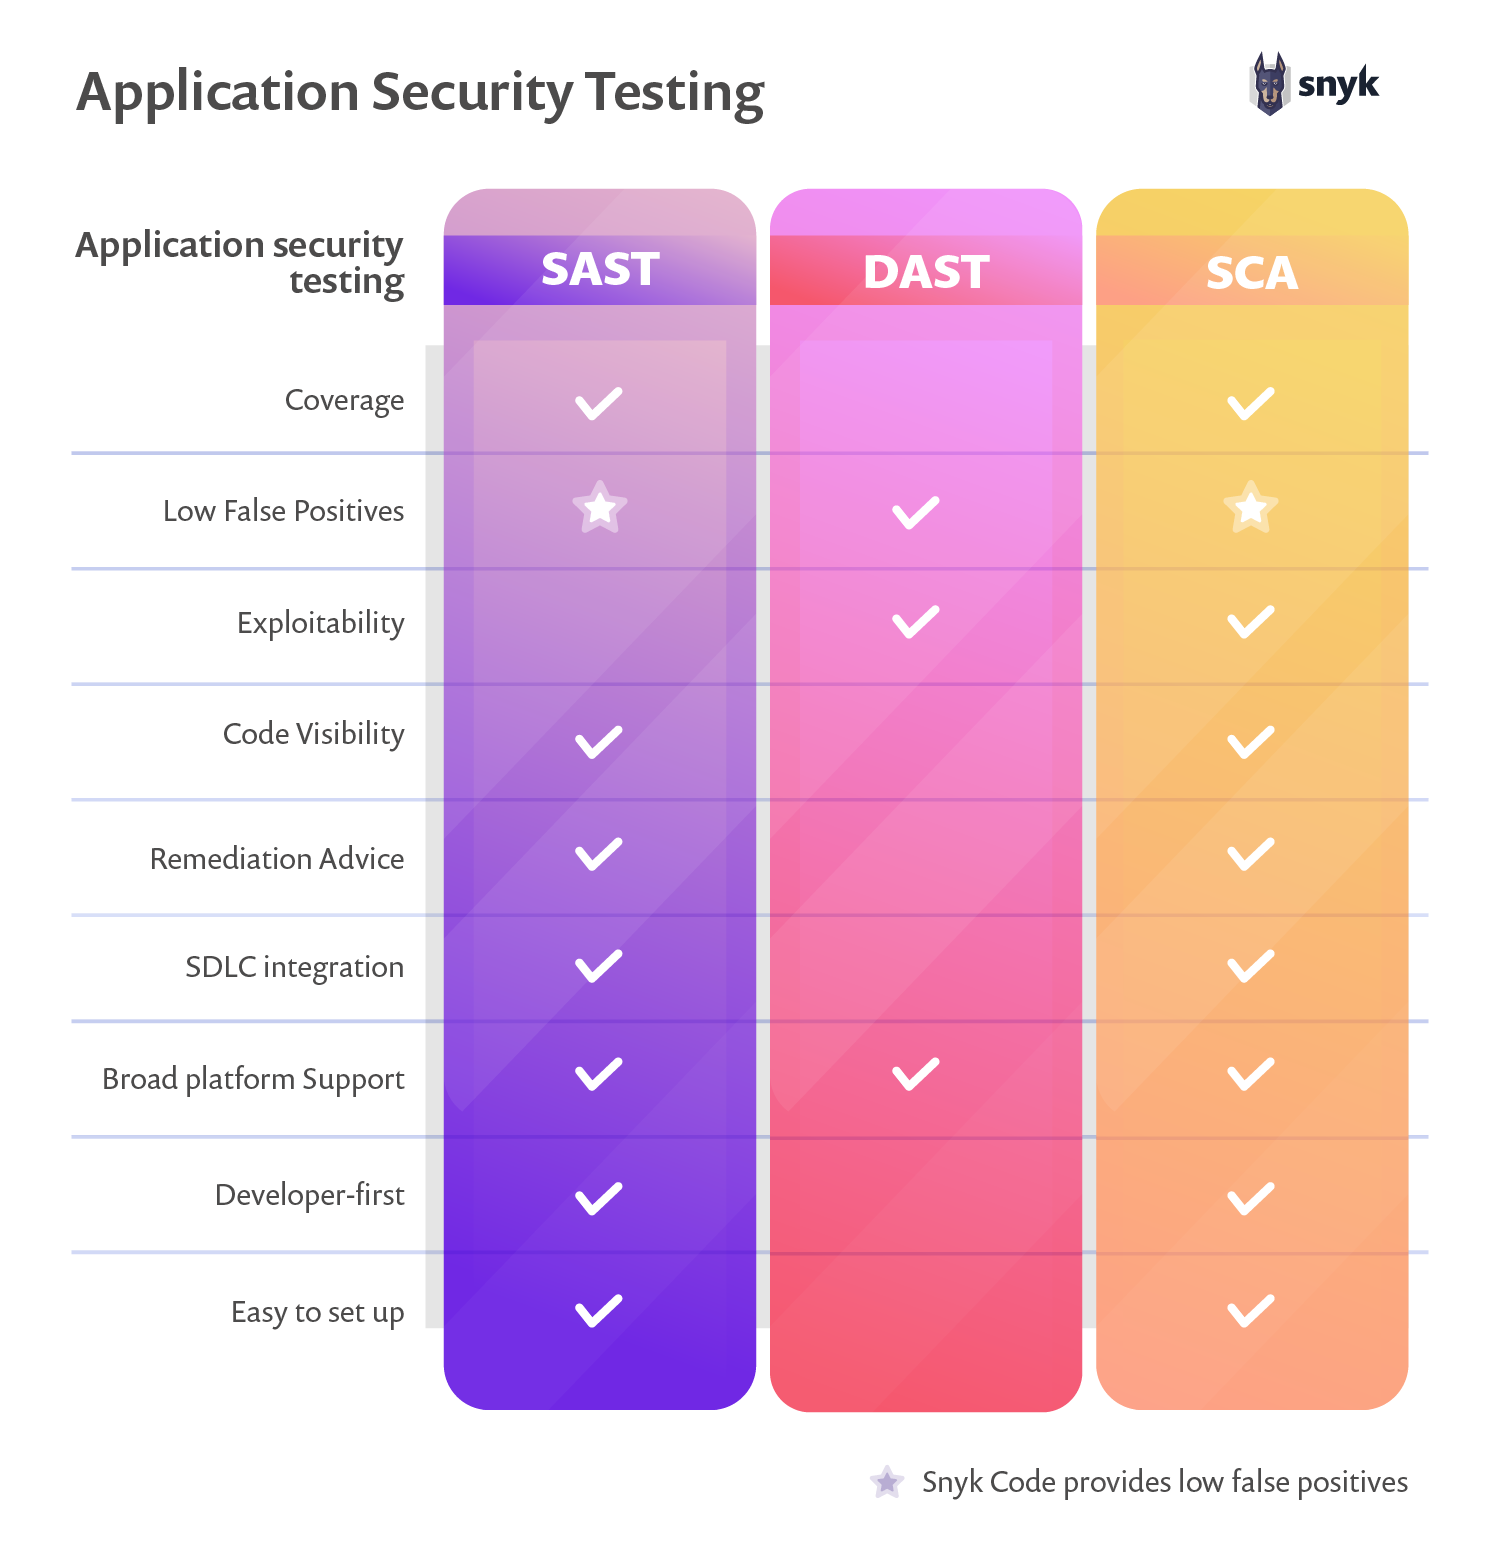 How to Get Started in Application Security